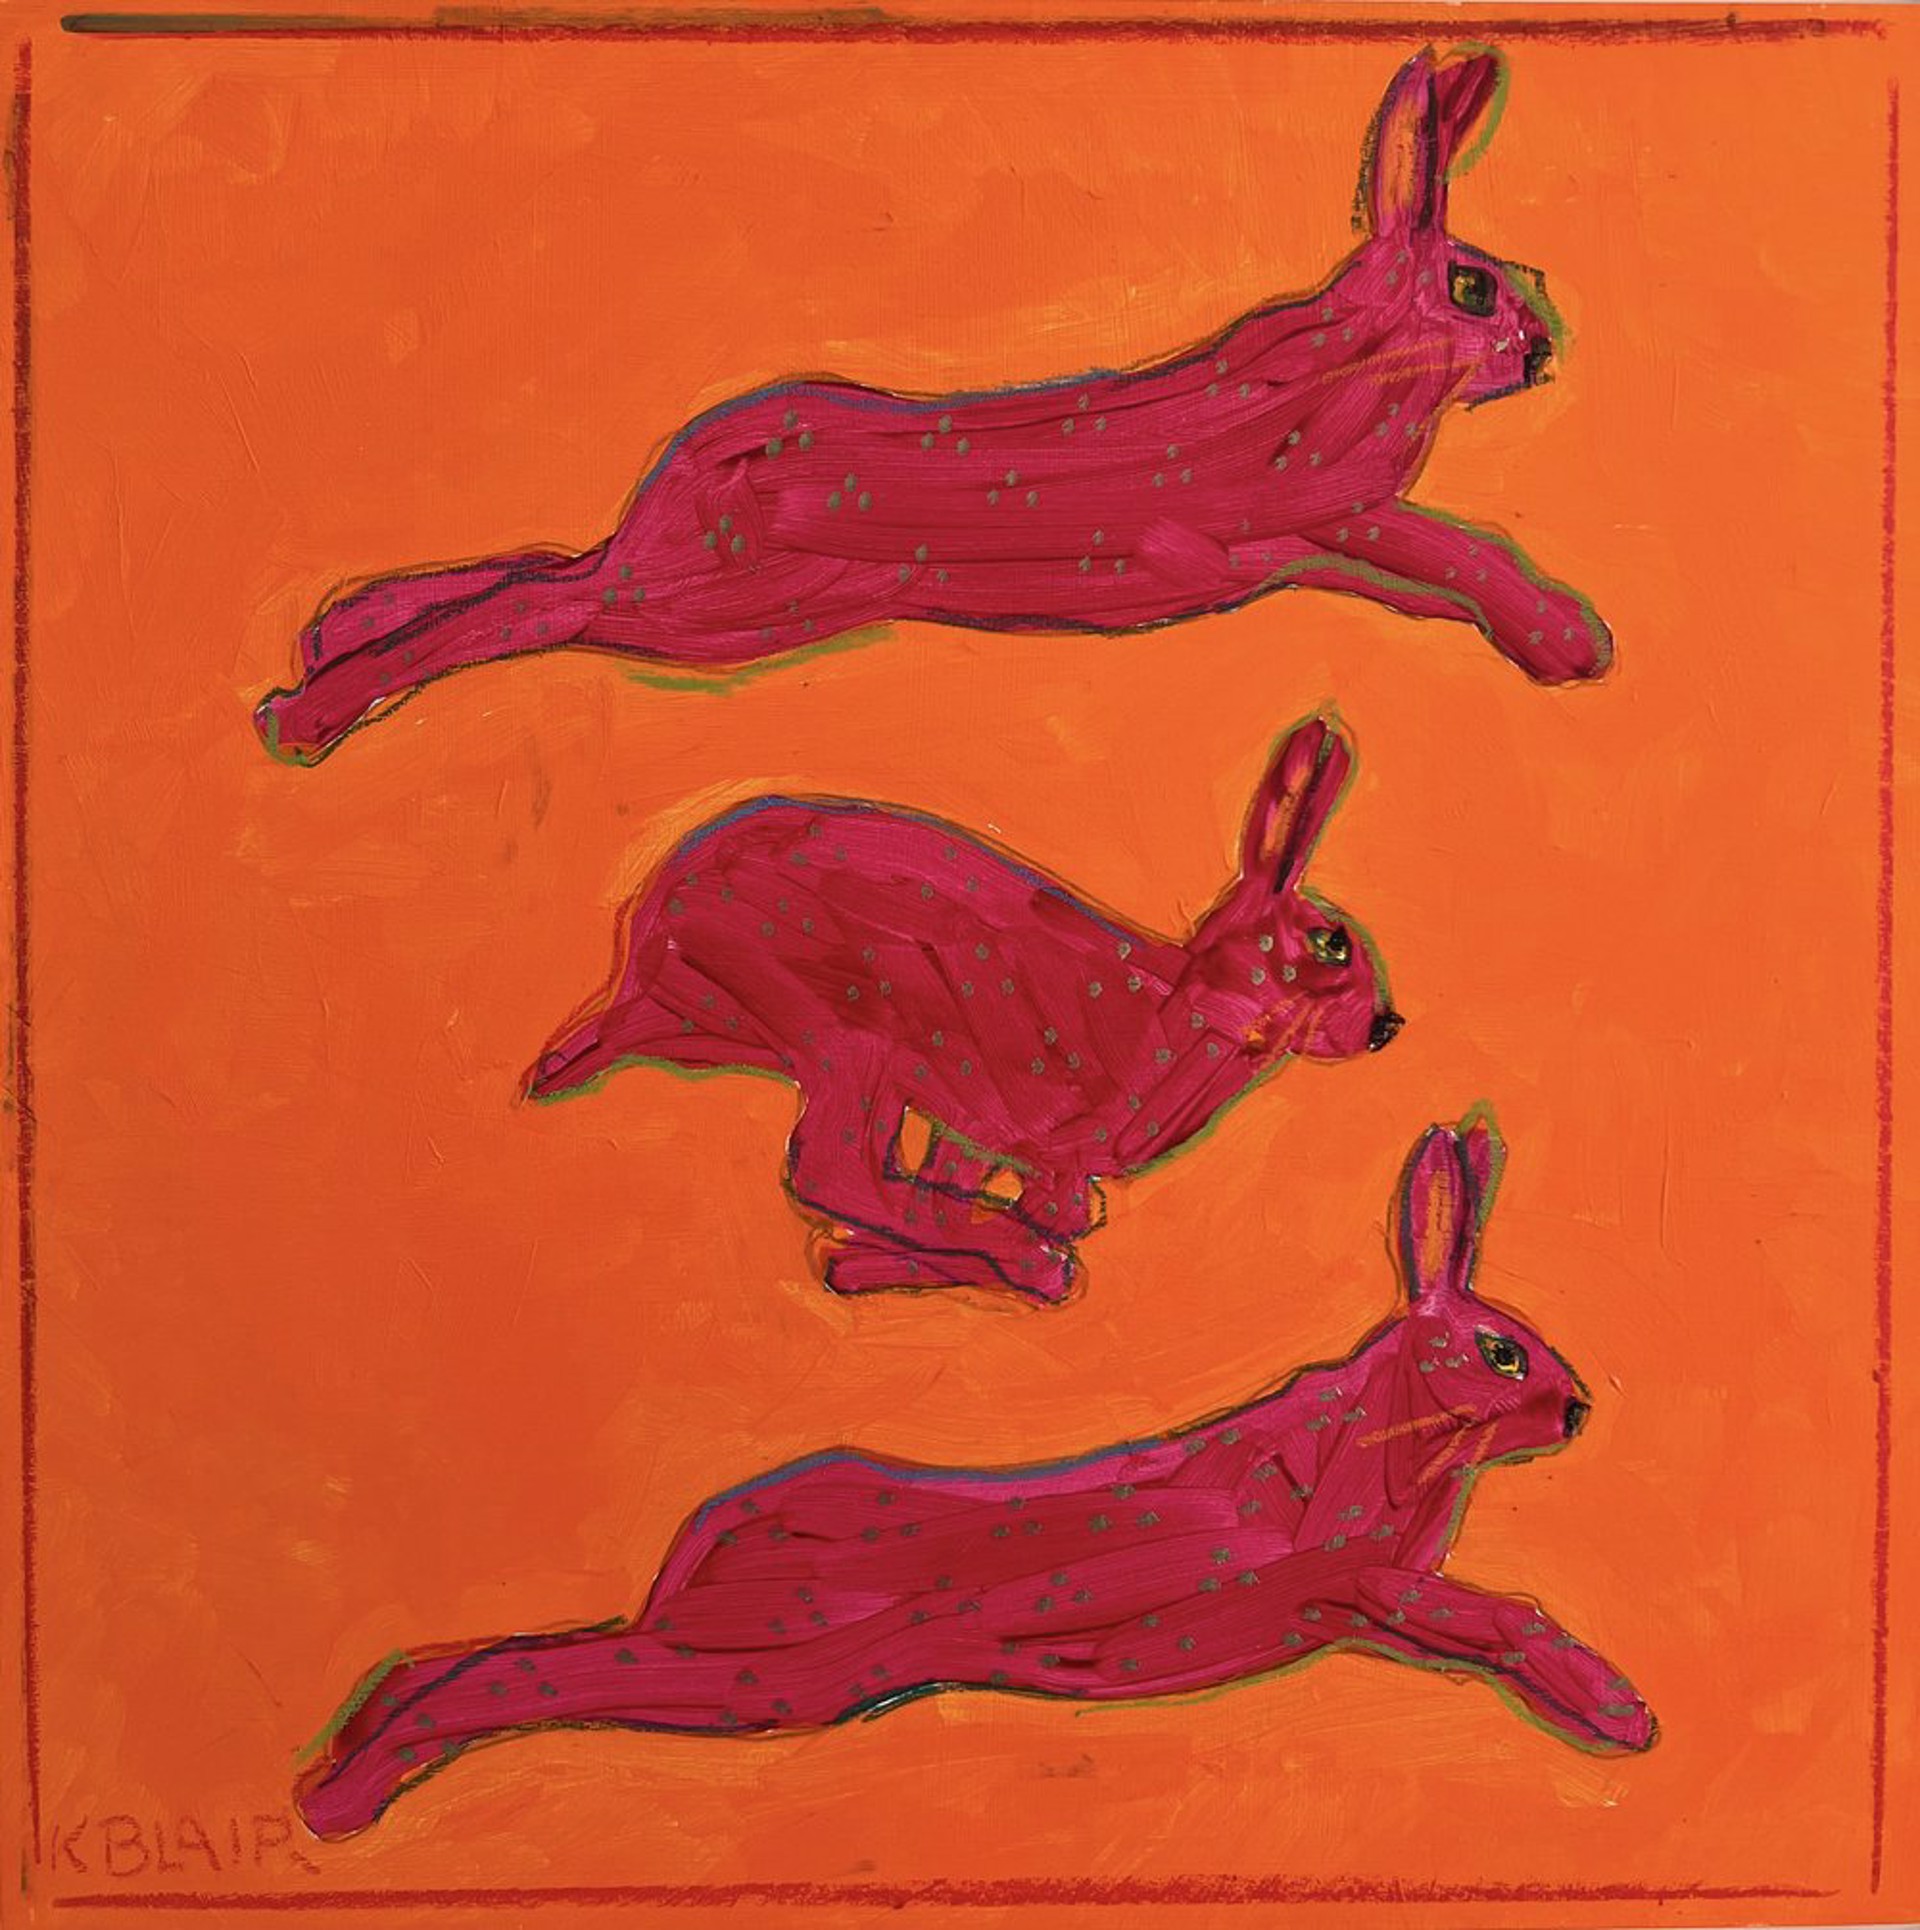 Leaping Disco Hares I by Karen Blair